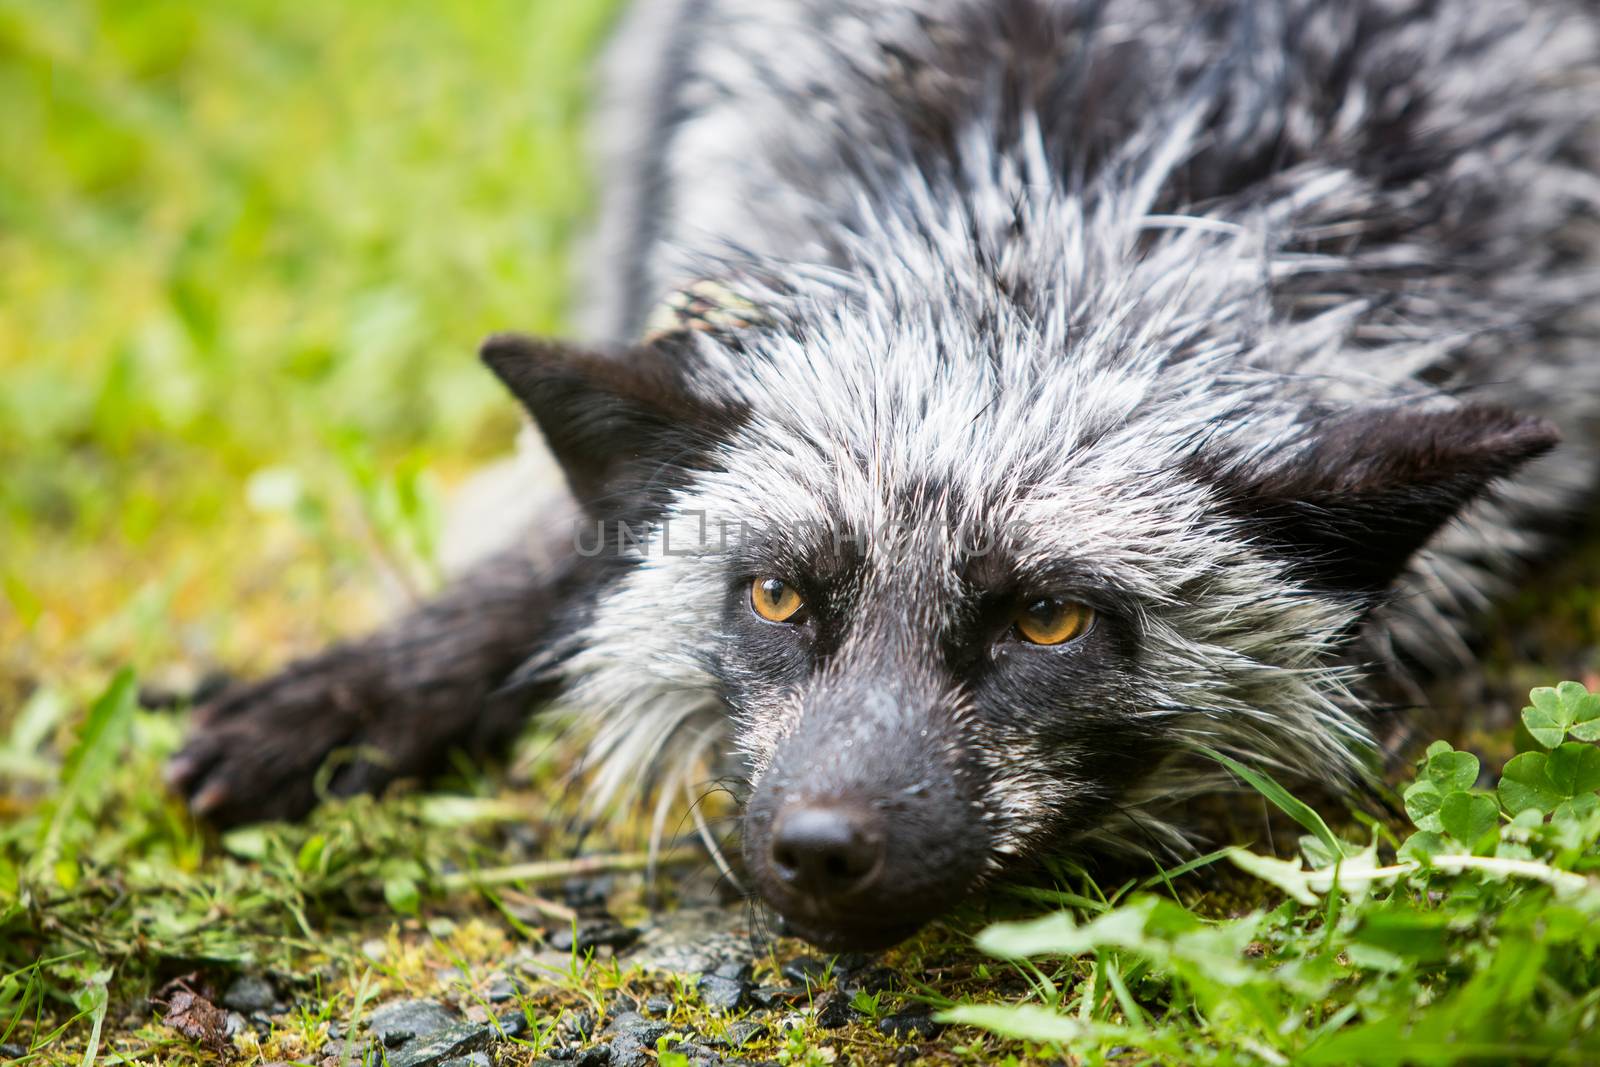 Melanistic silver version of the red fox variety relaxing outdoors